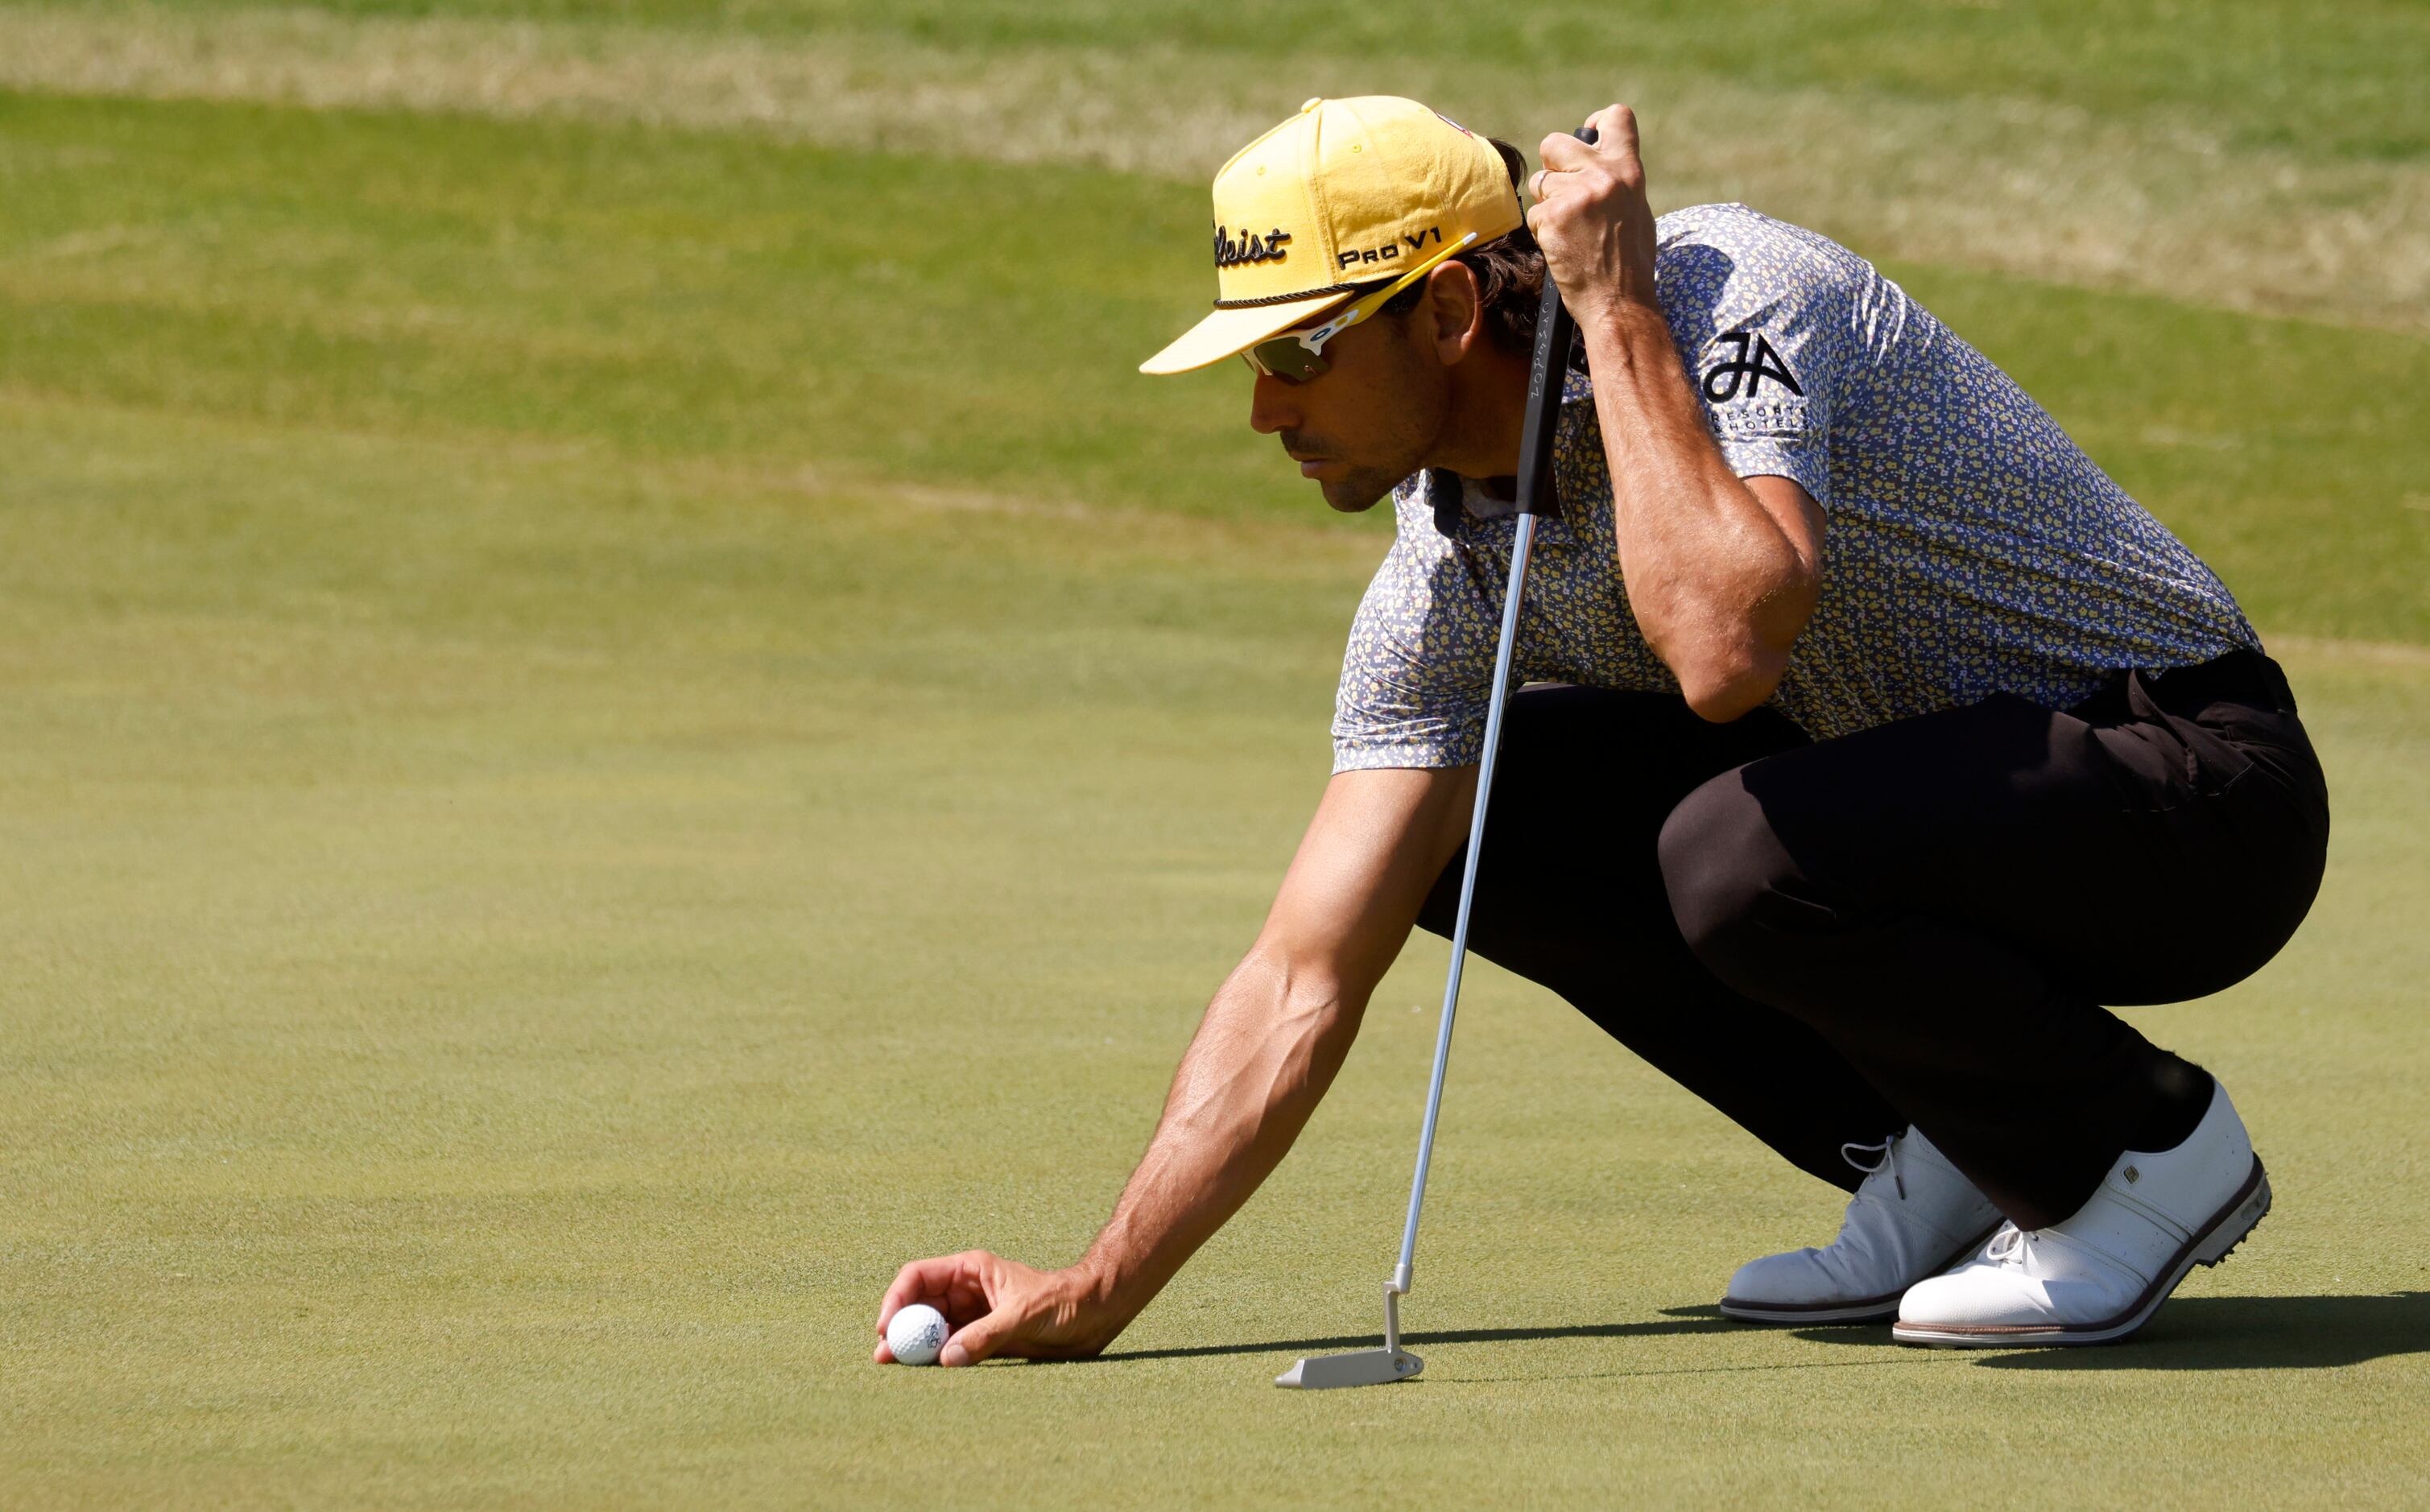 Rafa Cabrera Bello prepares to putt on the 7th hole during round 1 of the AT&T Byron Nelson ...